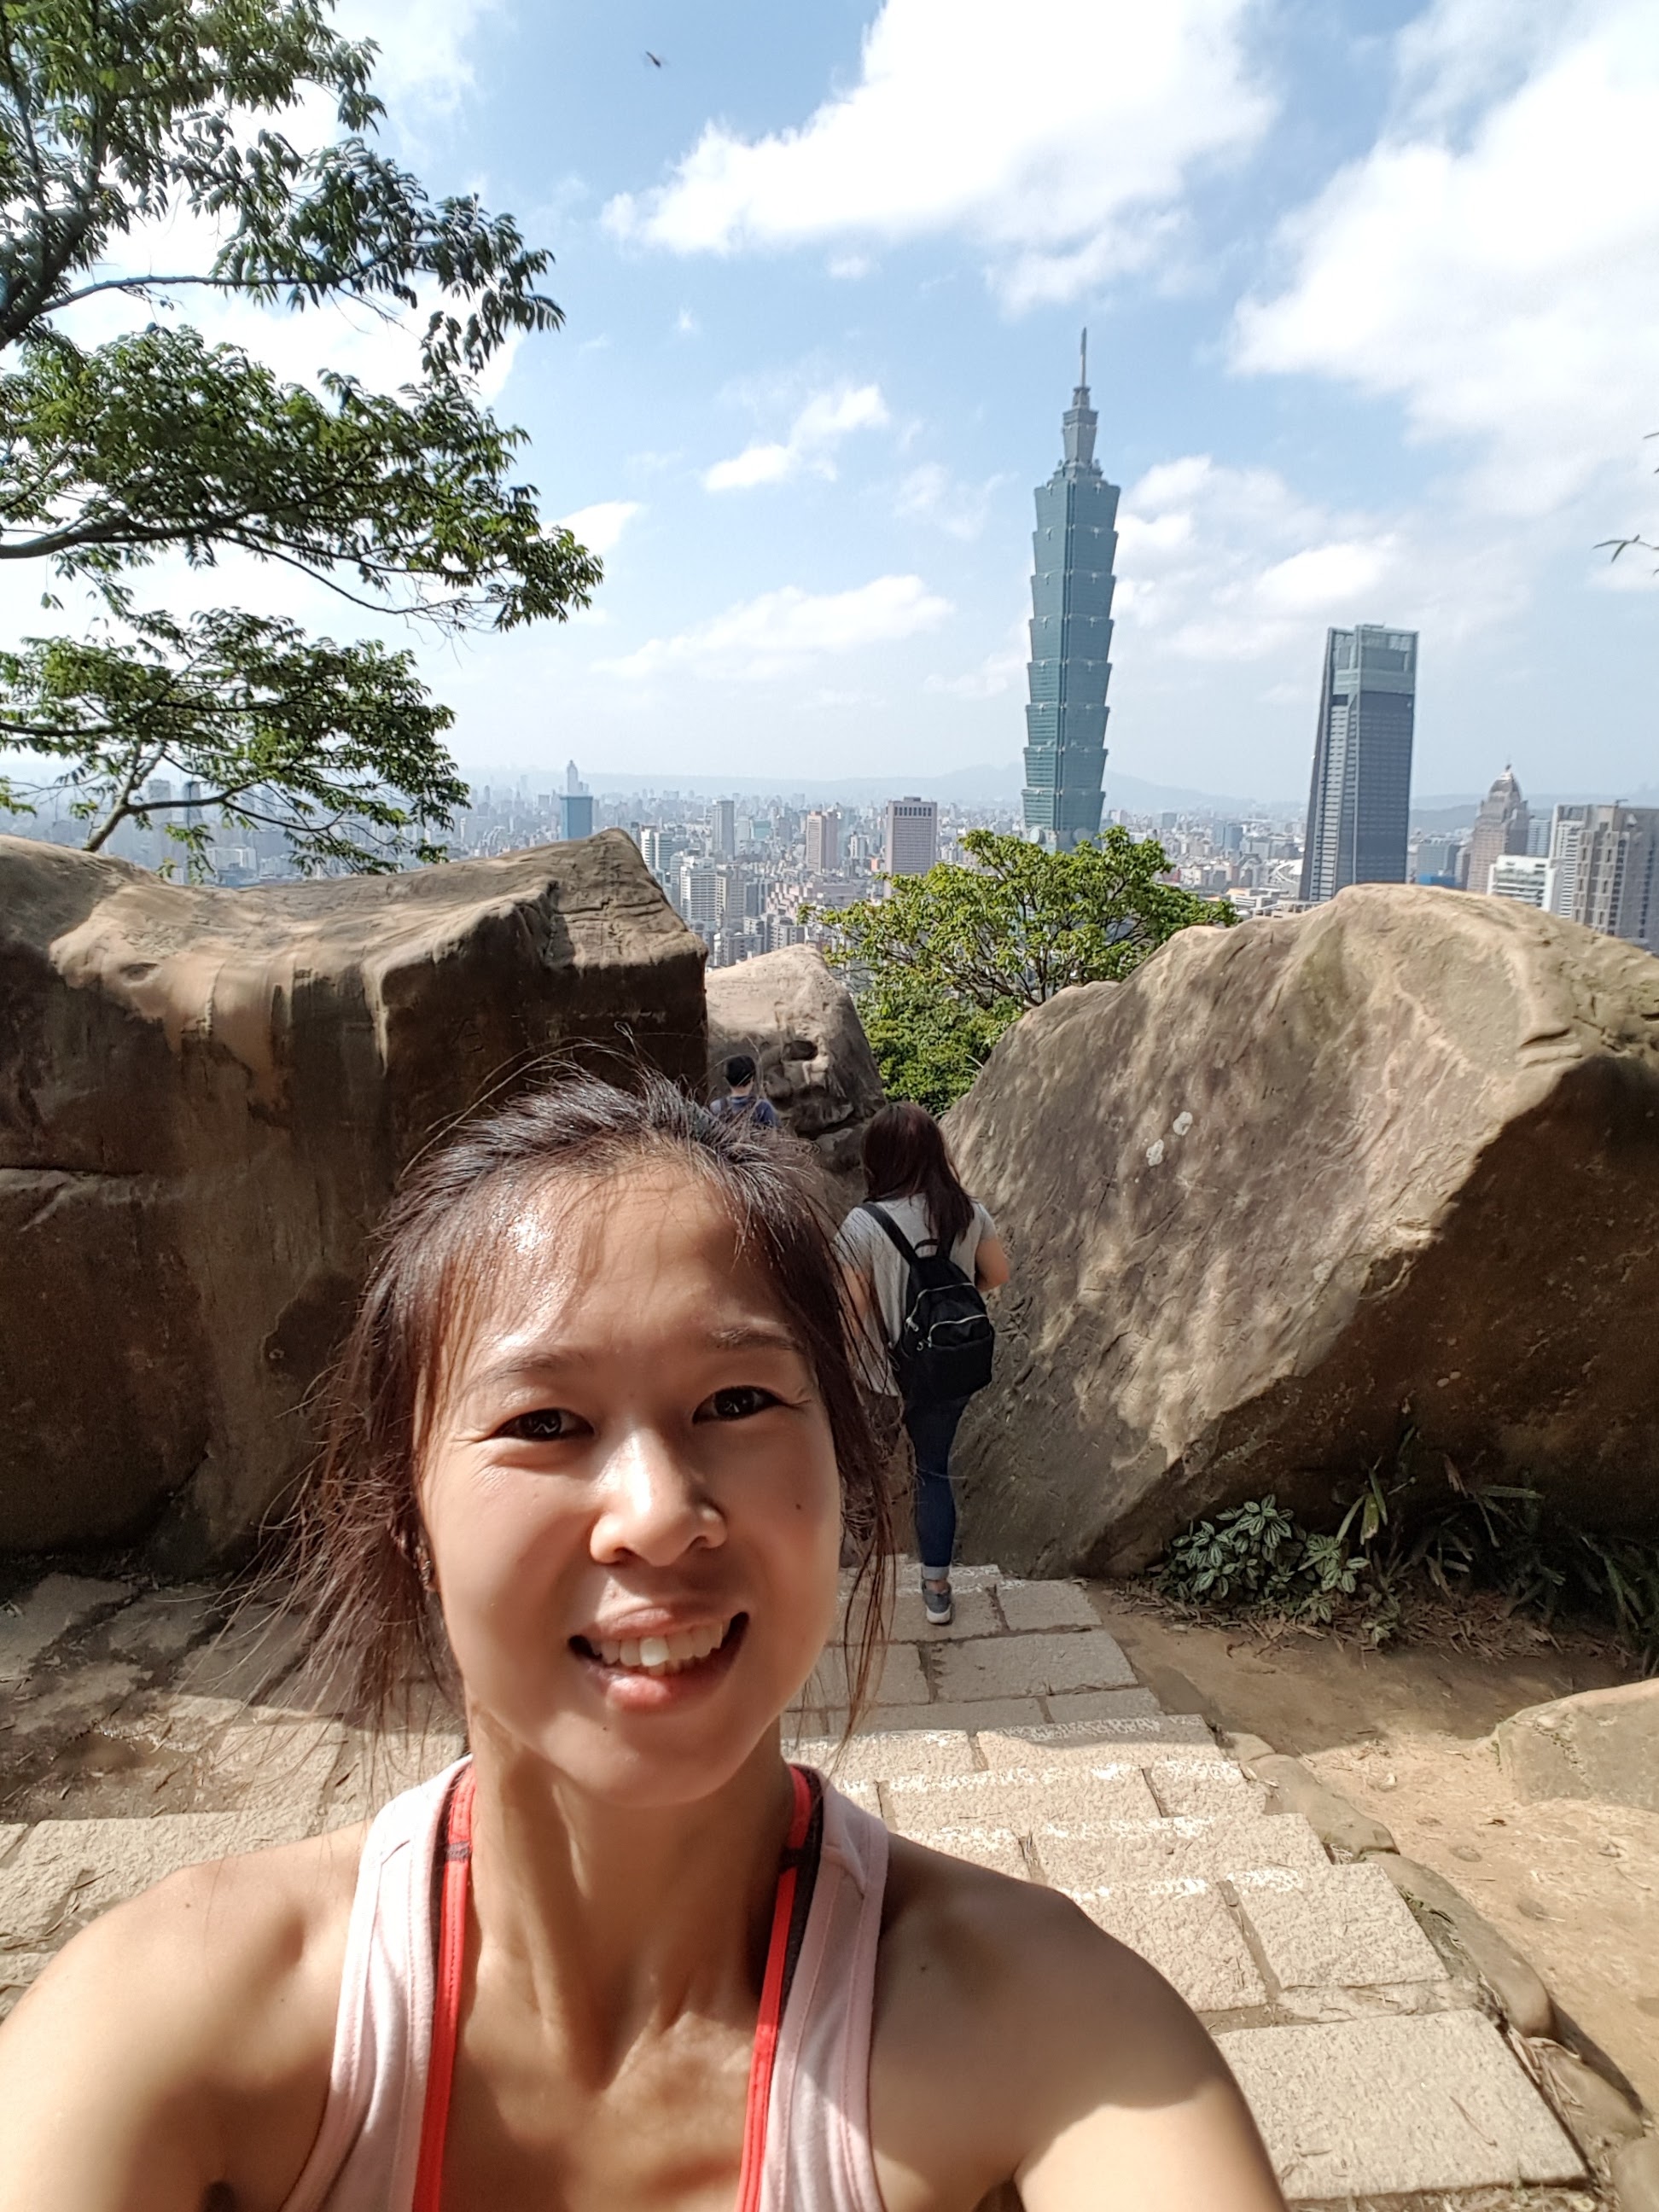 Teaching English and Living in Taiwan Tutors of Chinese Wanted  華語教學工作機會, Looking for someone to practice speaking with image